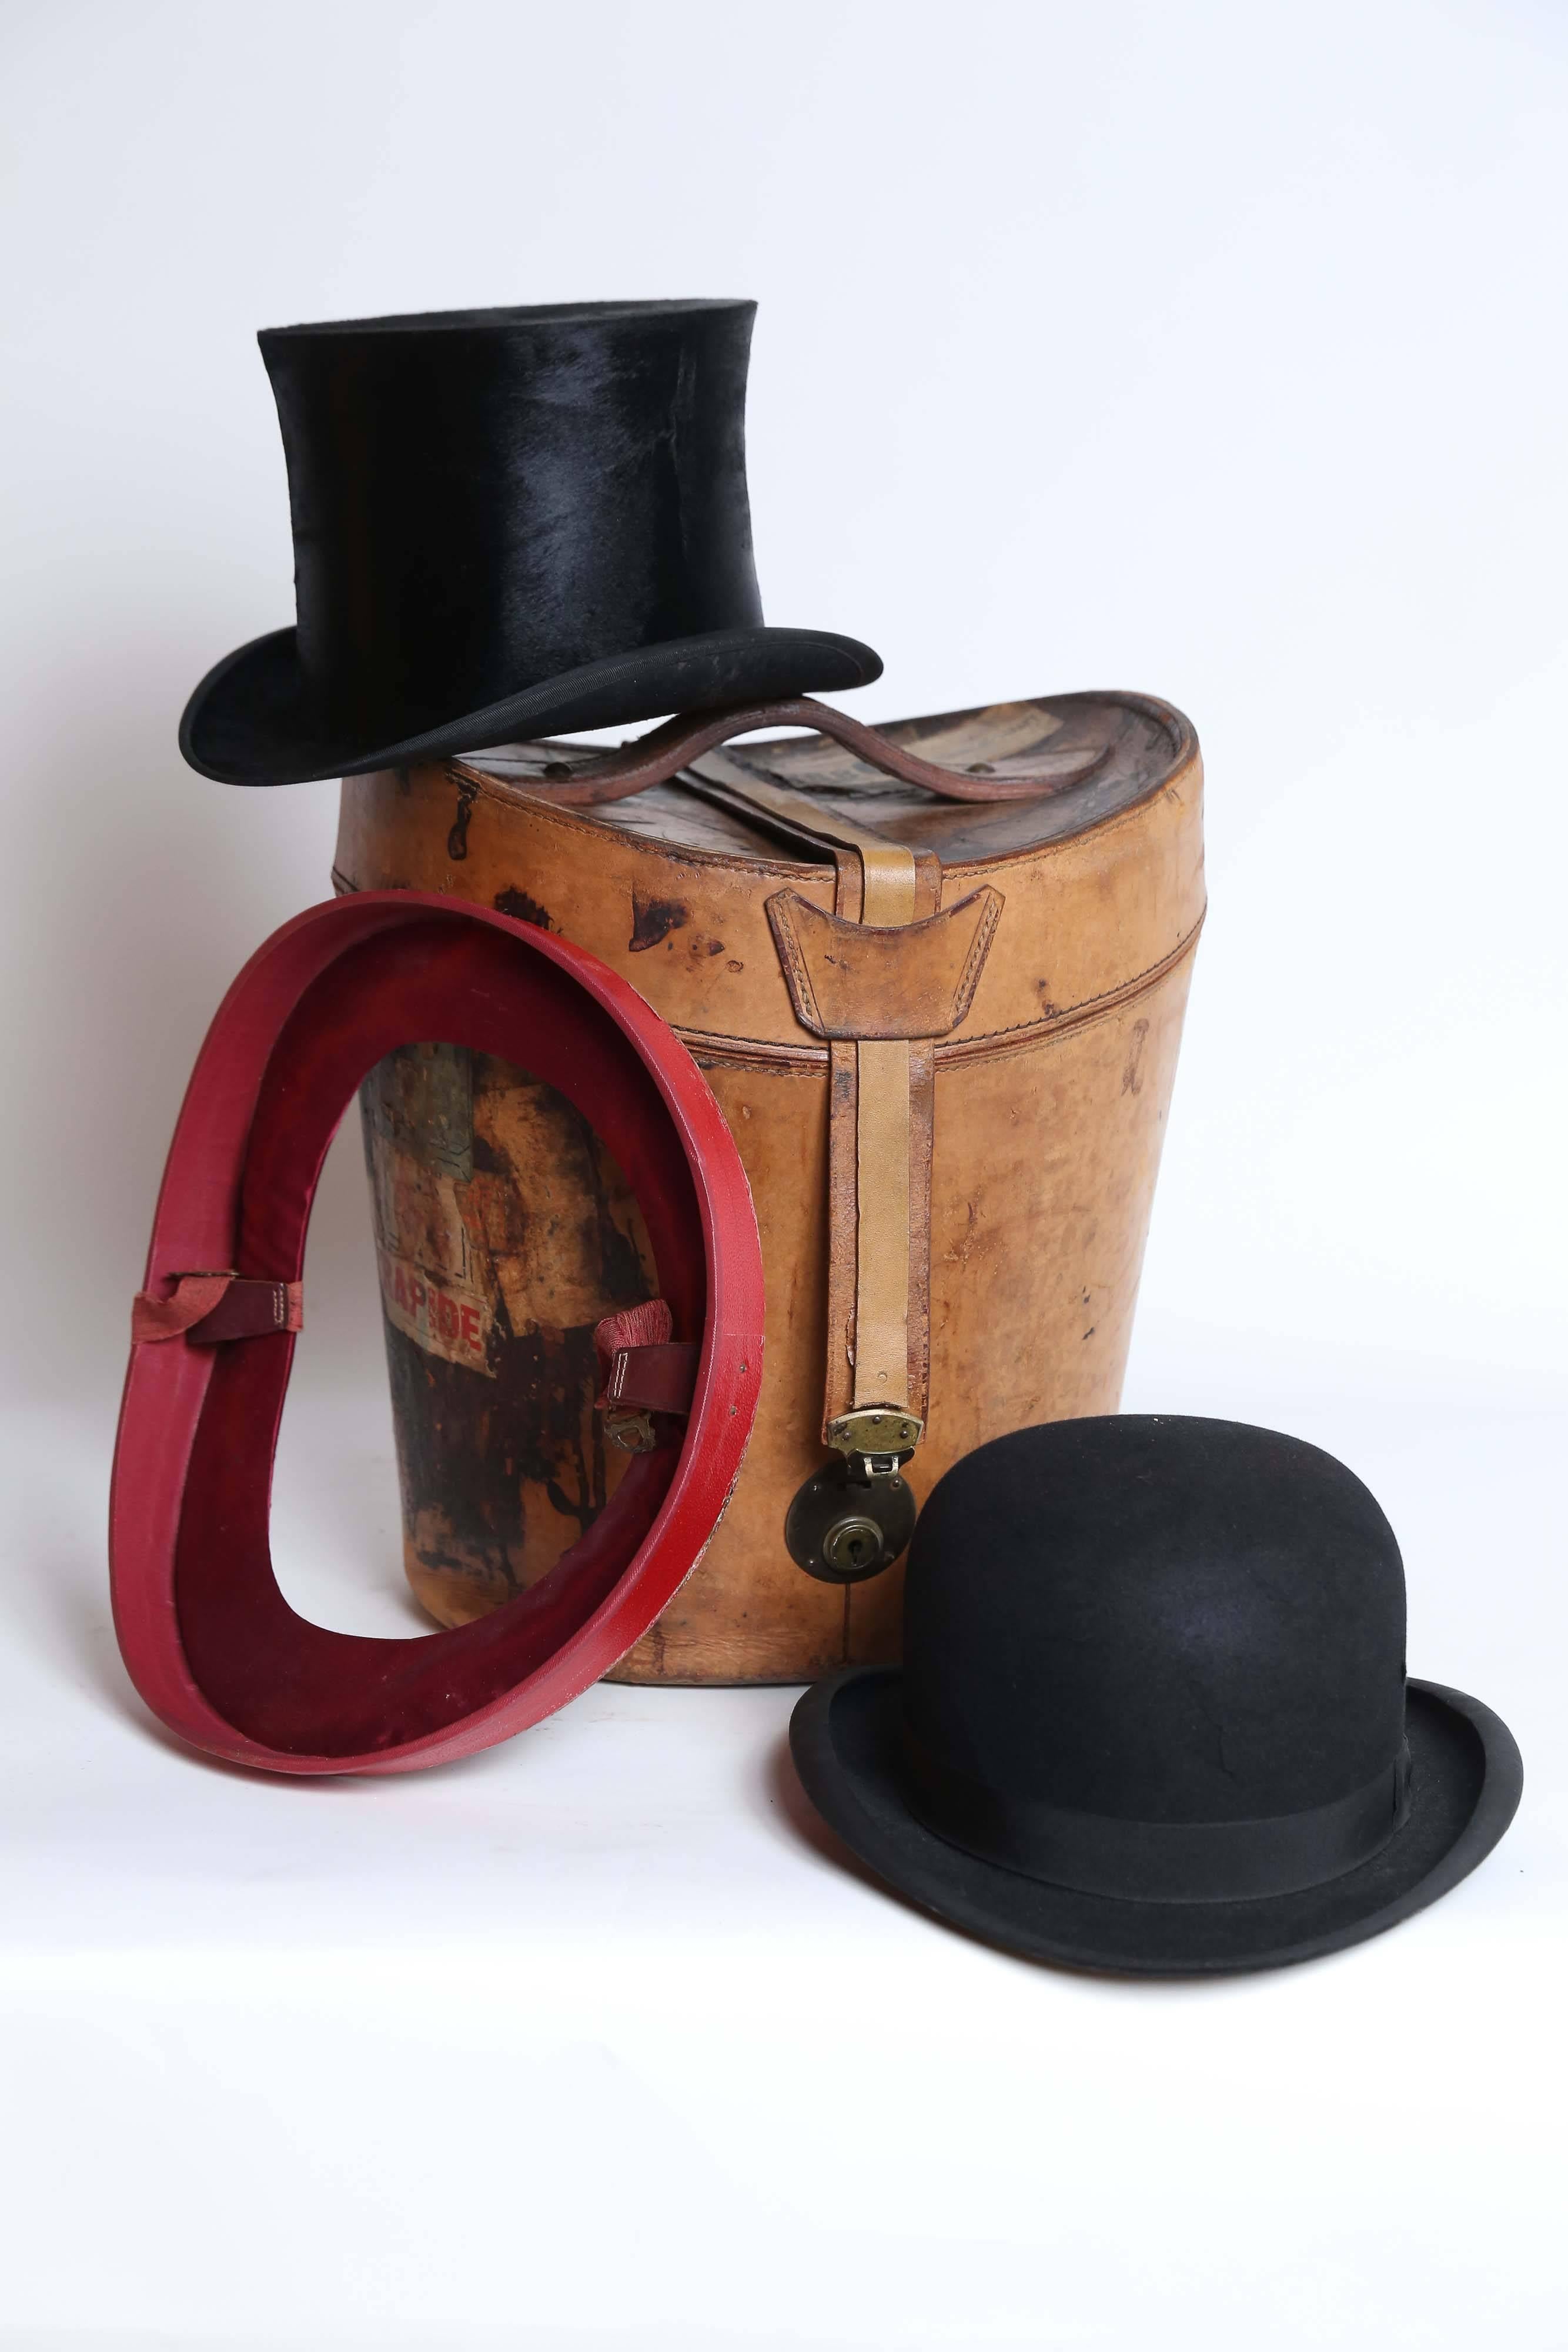 19th century hats for sale